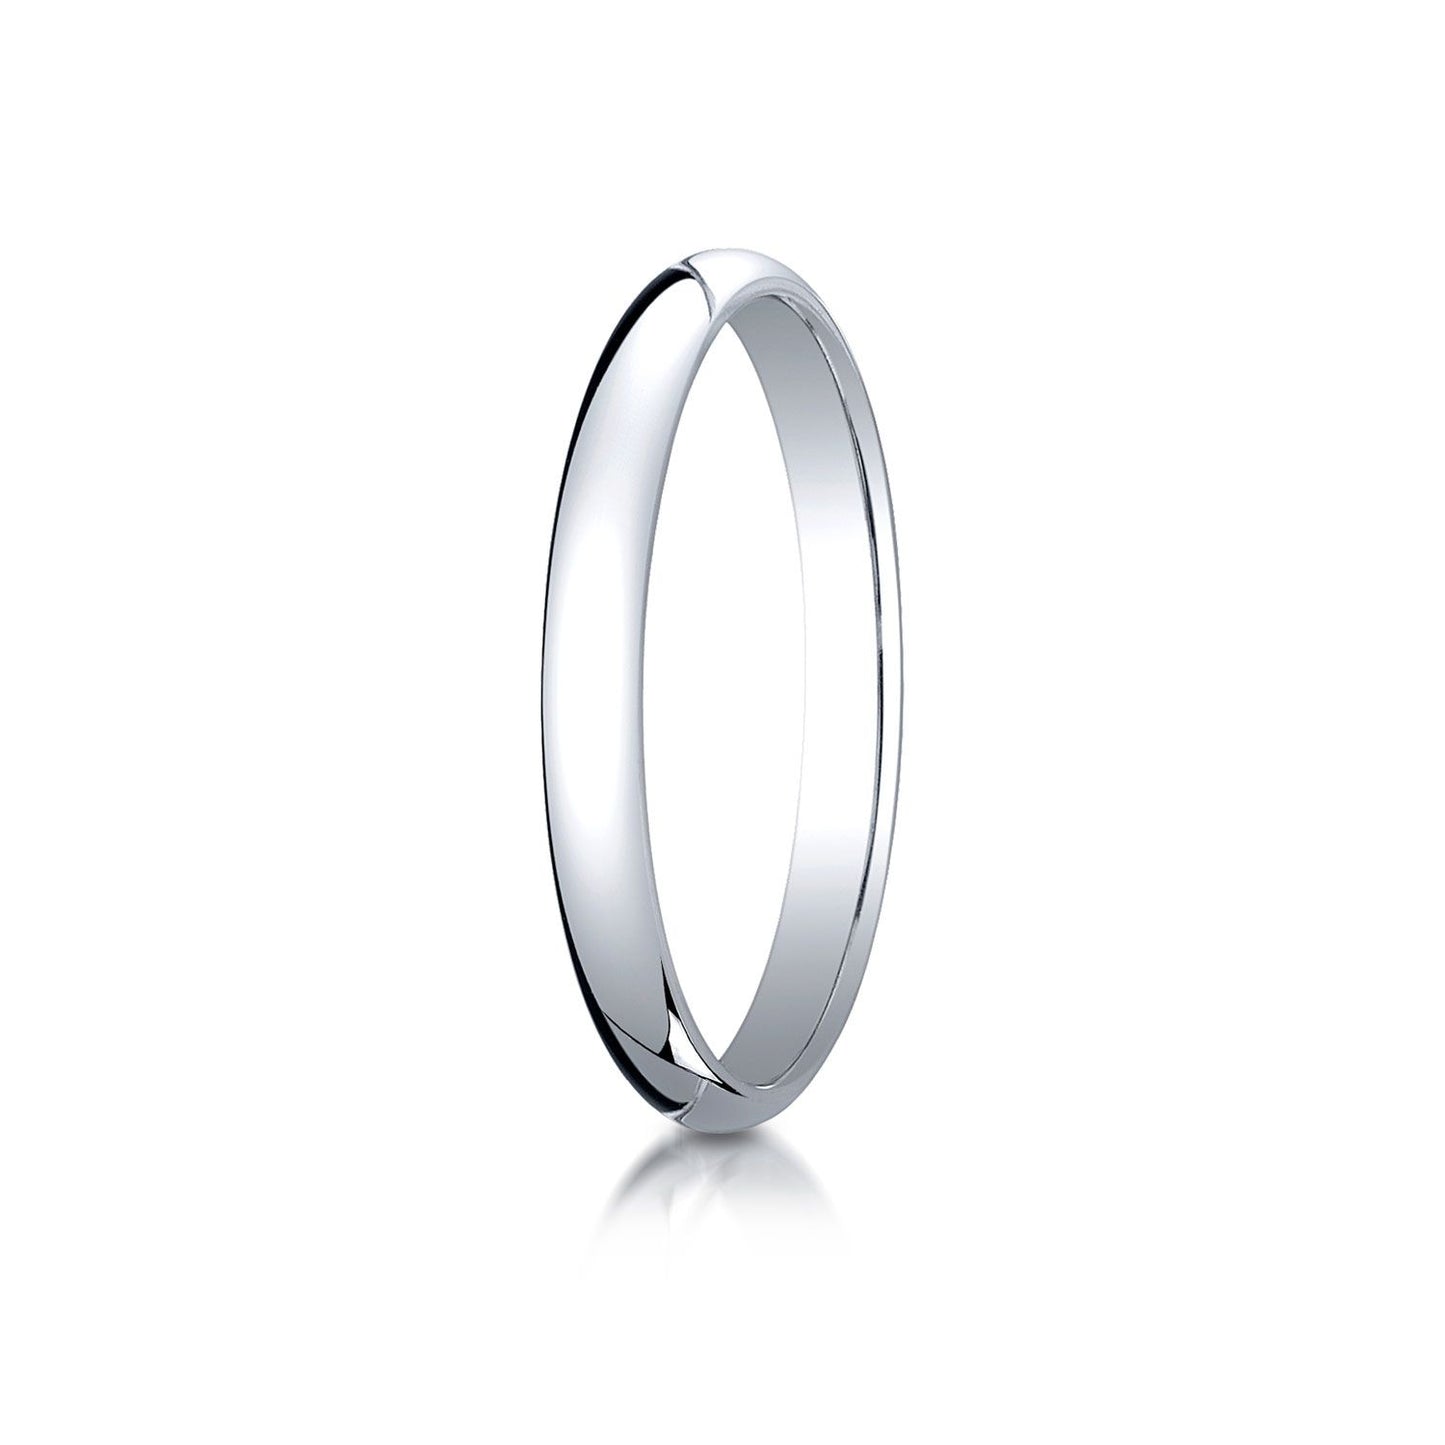 Platinum 2.5 Mm Slightly Domed Traditional Oval Ring